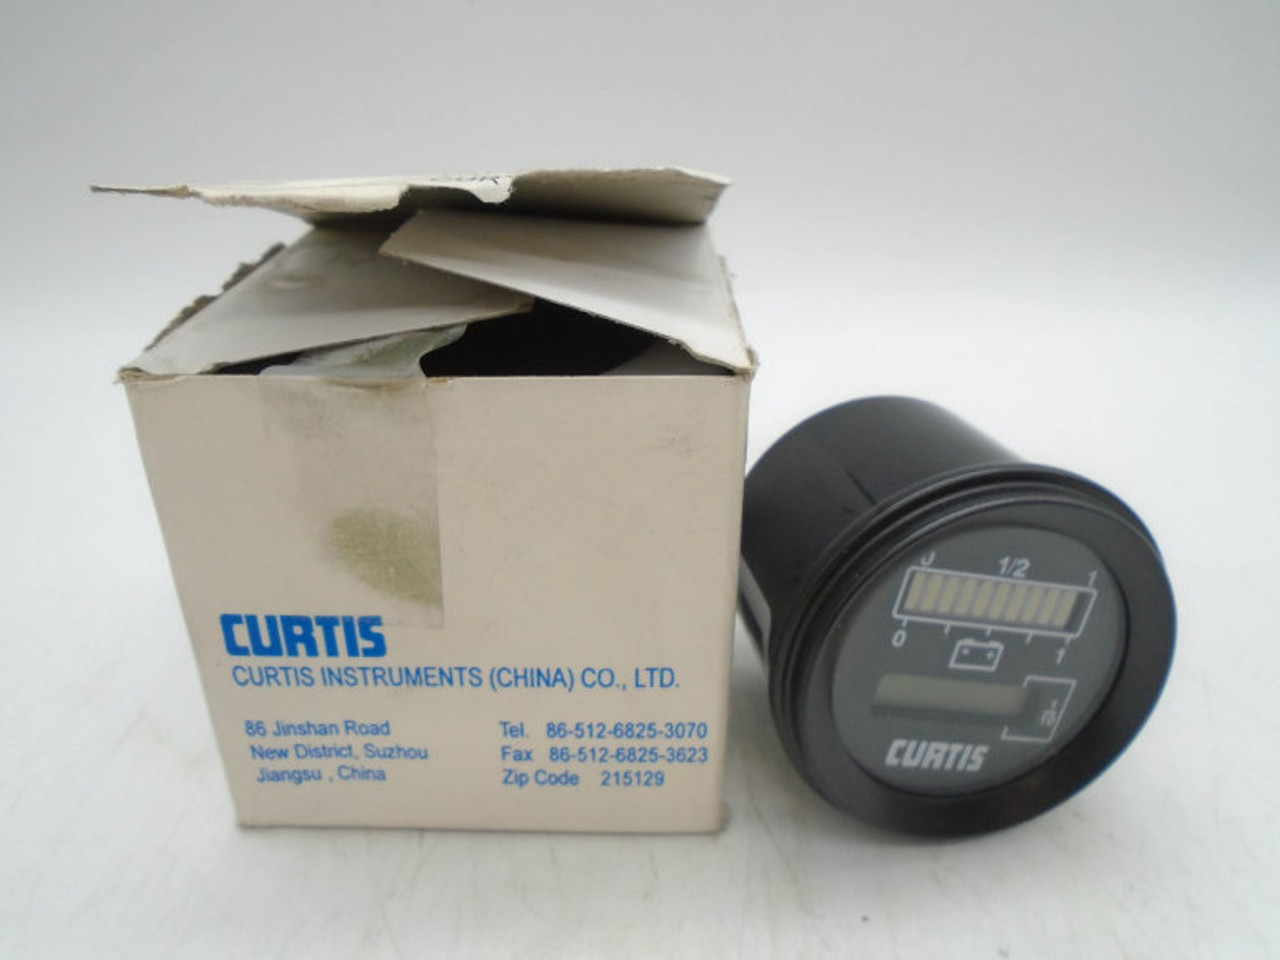 News From Curtis  Curtis Instruments